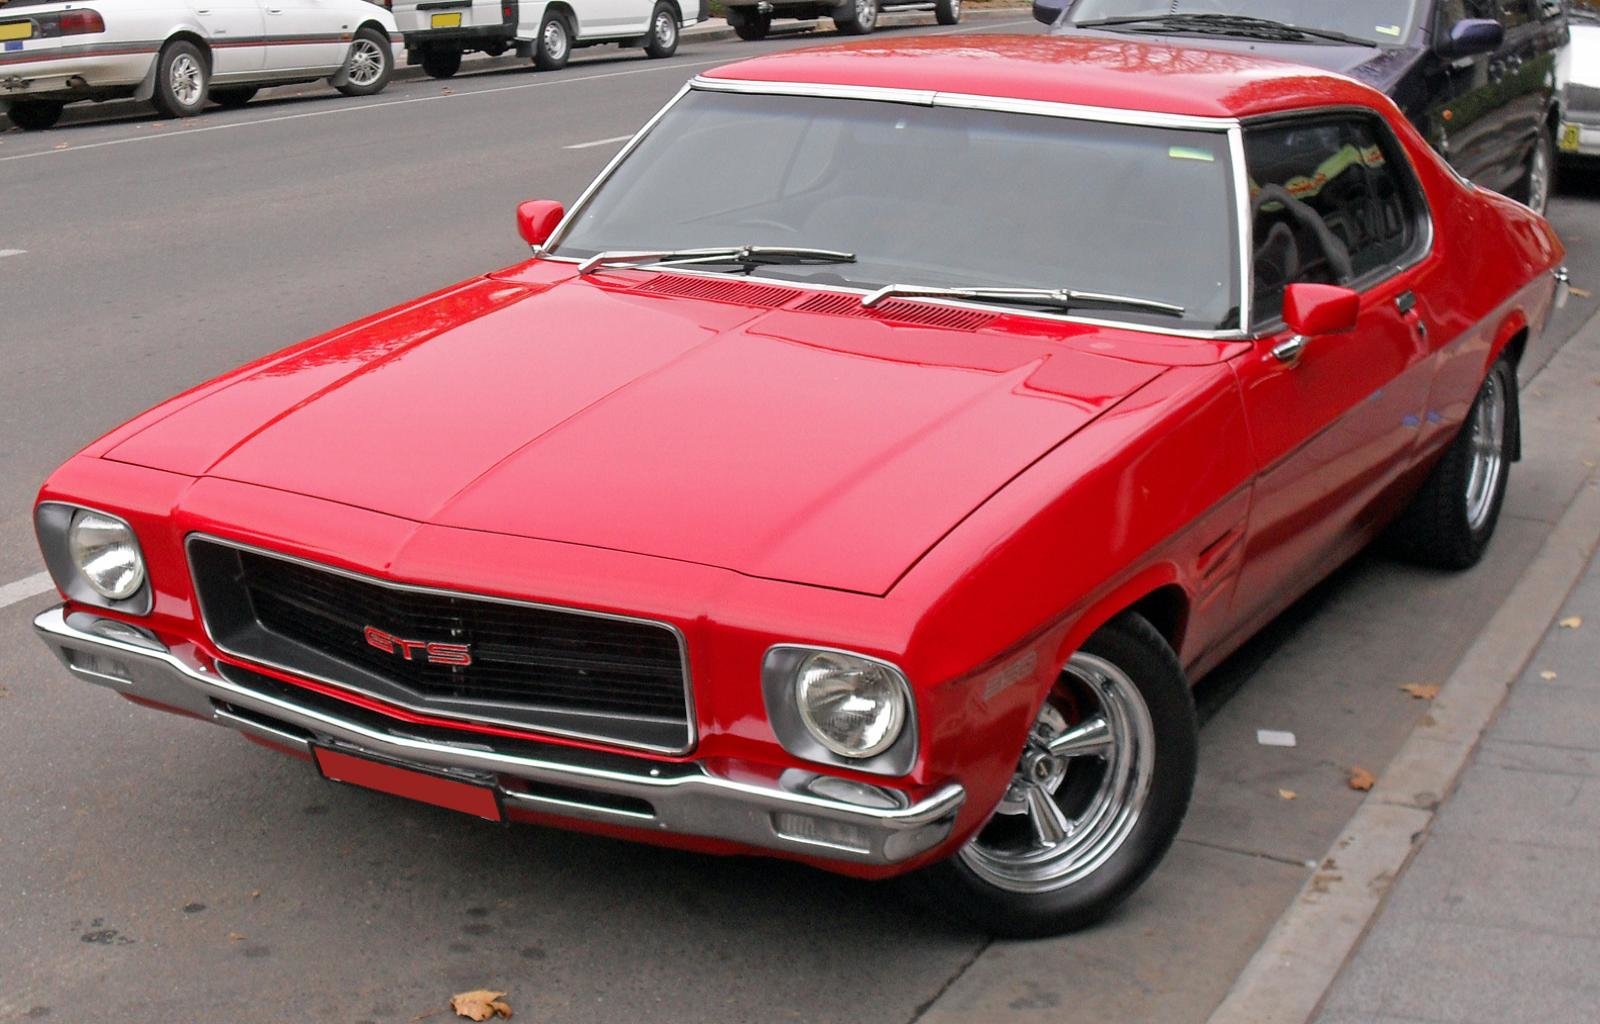 Free Holden high quality wallpaper ID:470030 for hd 1600x1024 desktop